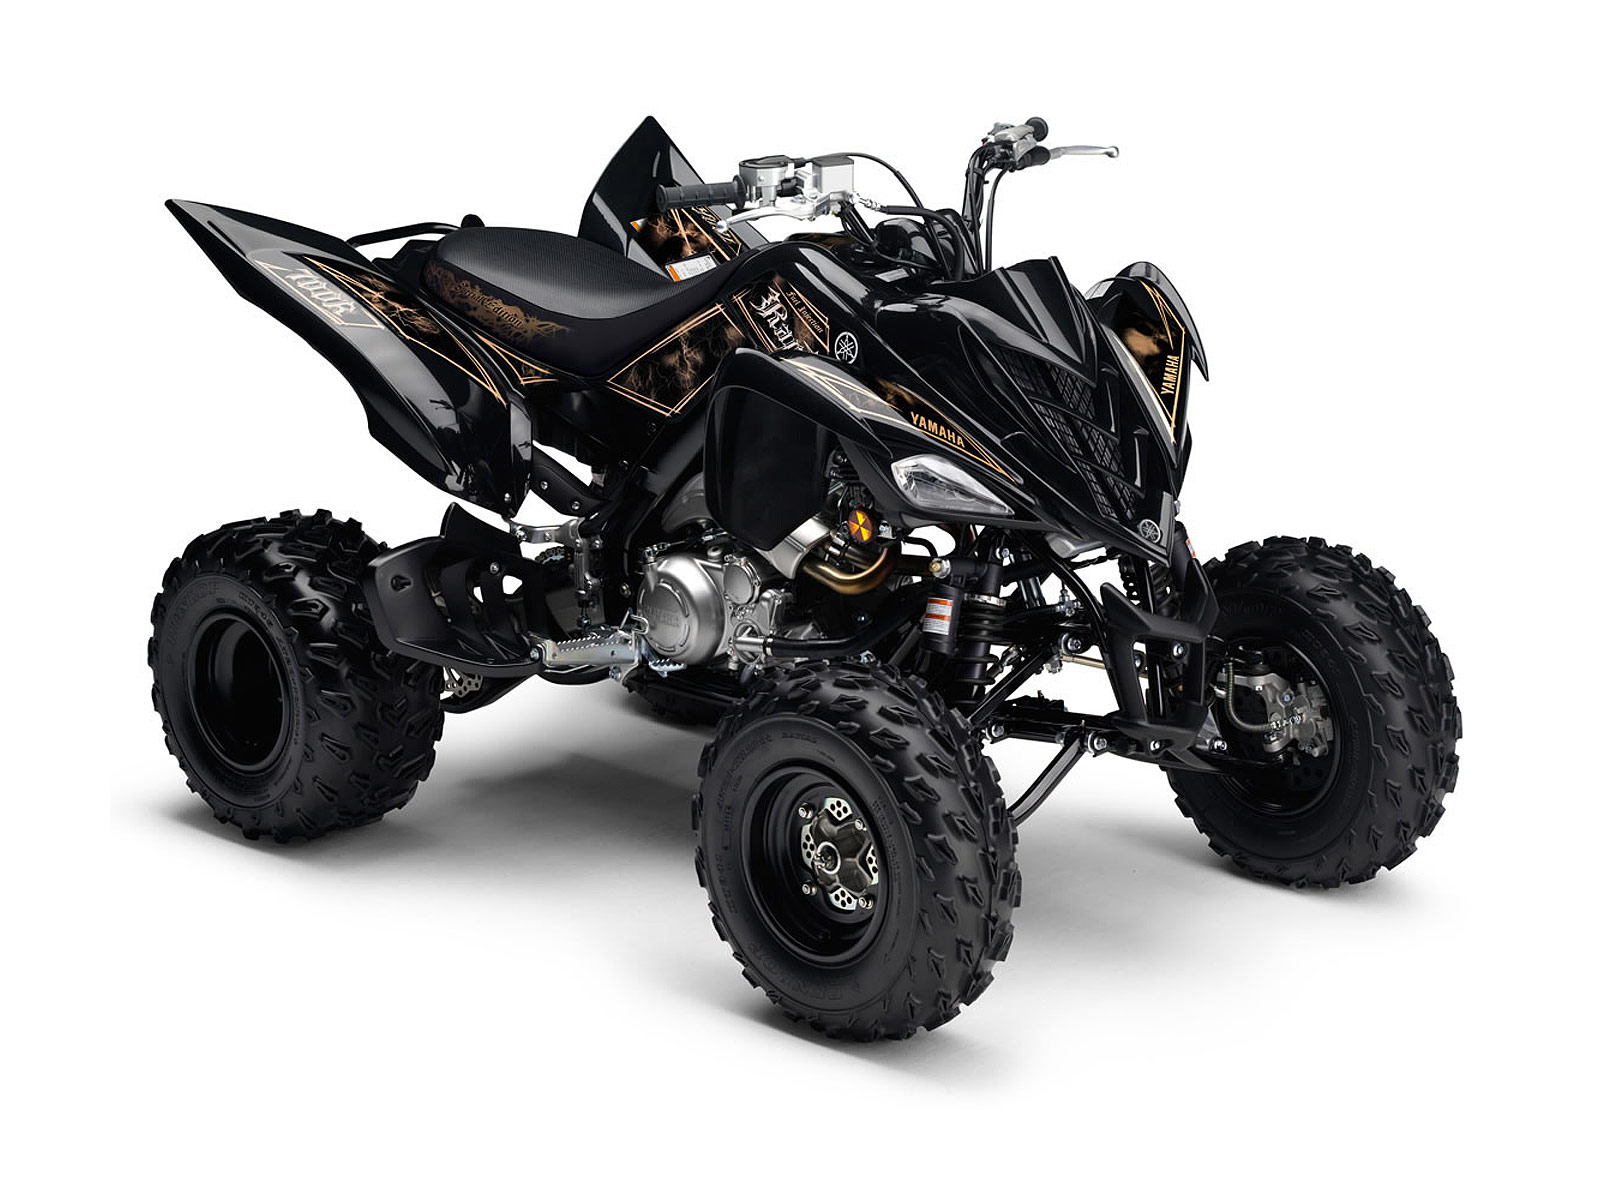 Yamaha Pictures And Specifications Motorcycle Scooter Atv